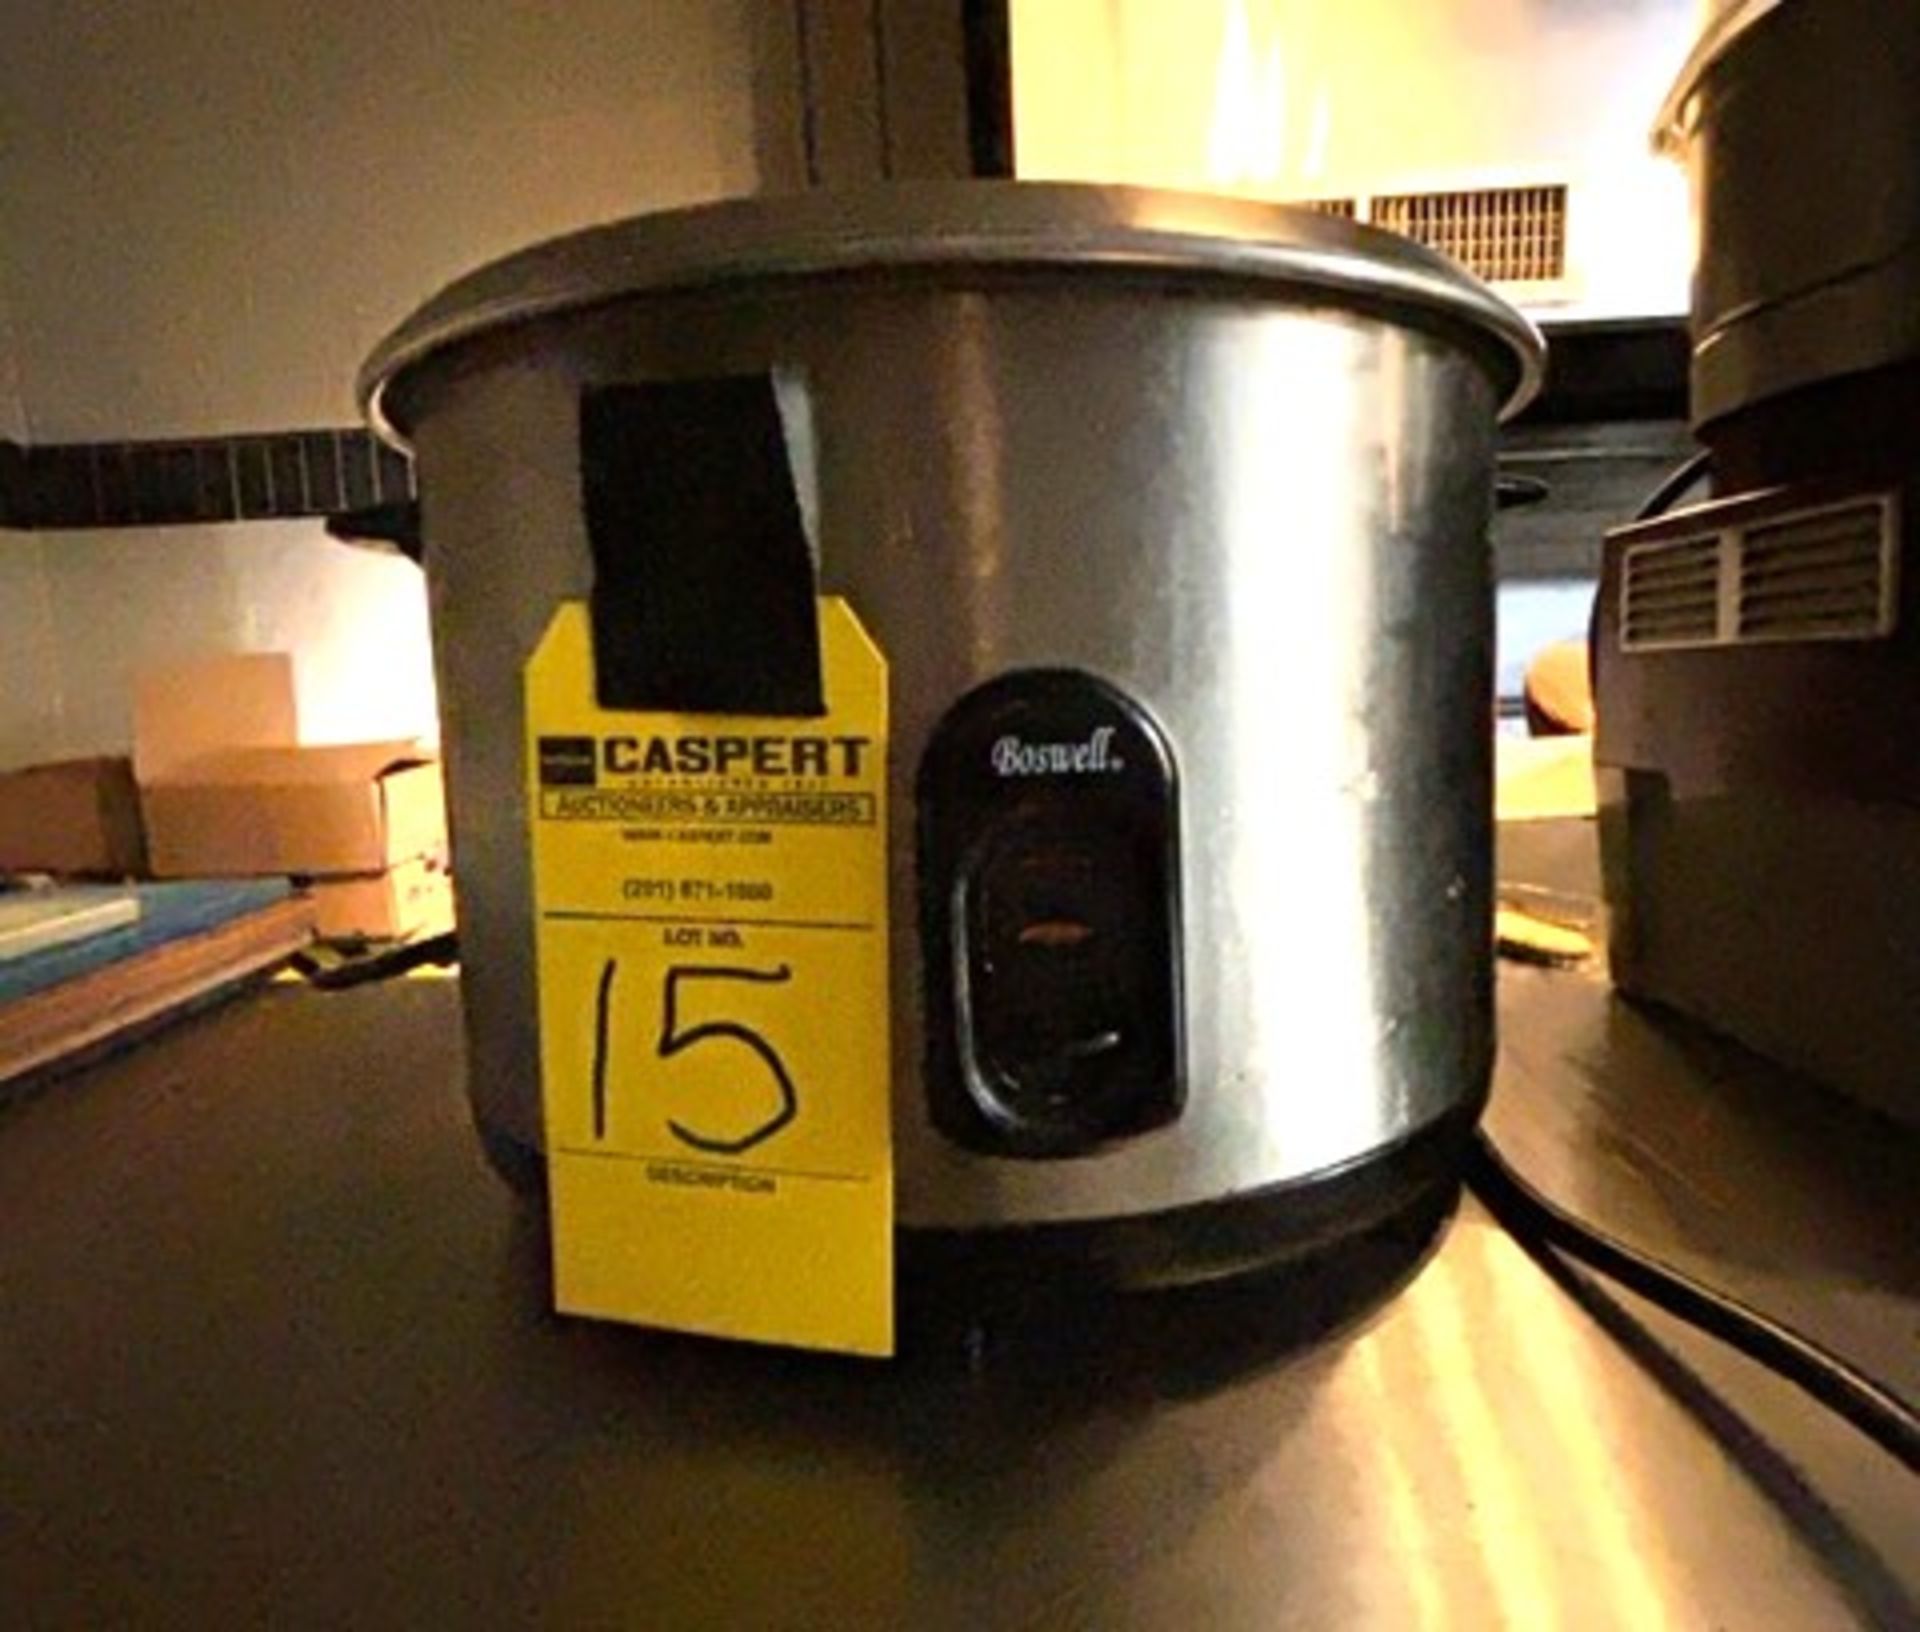 Boswell Rice Cooker